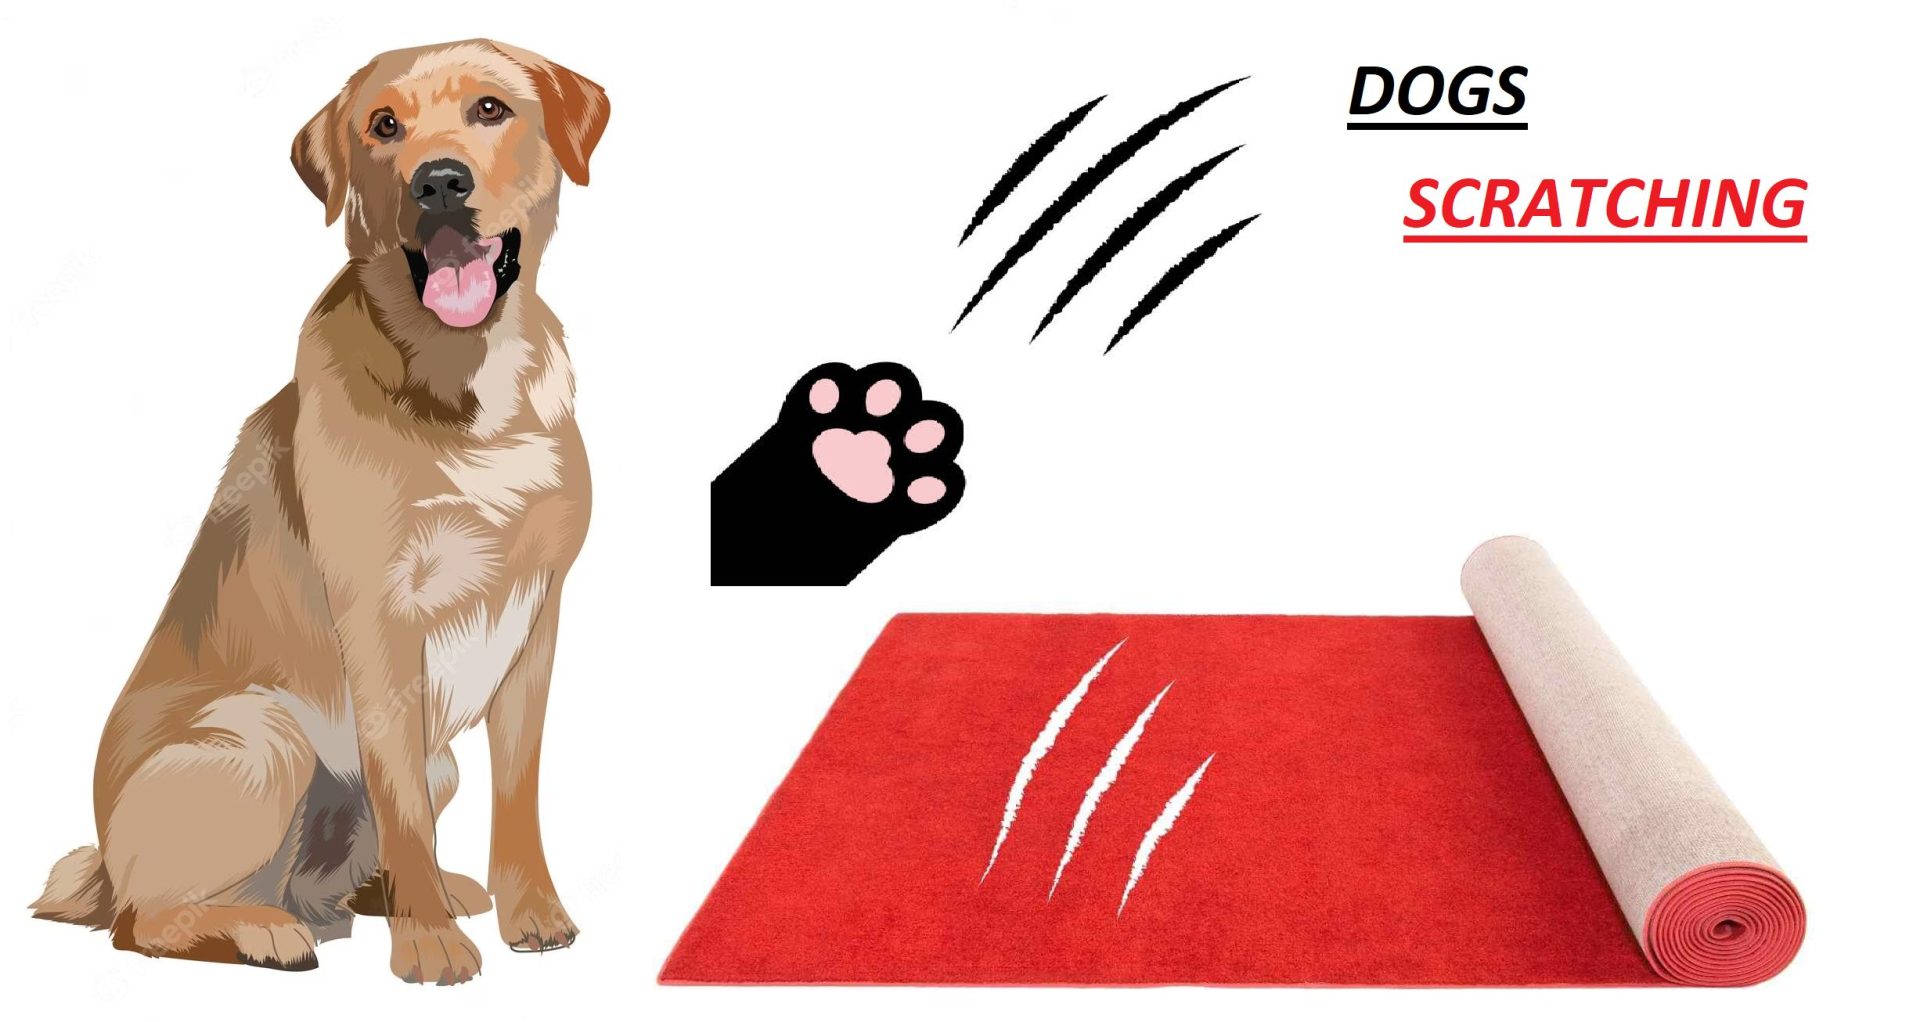 Why Do Dogs Scratch the Carpet?